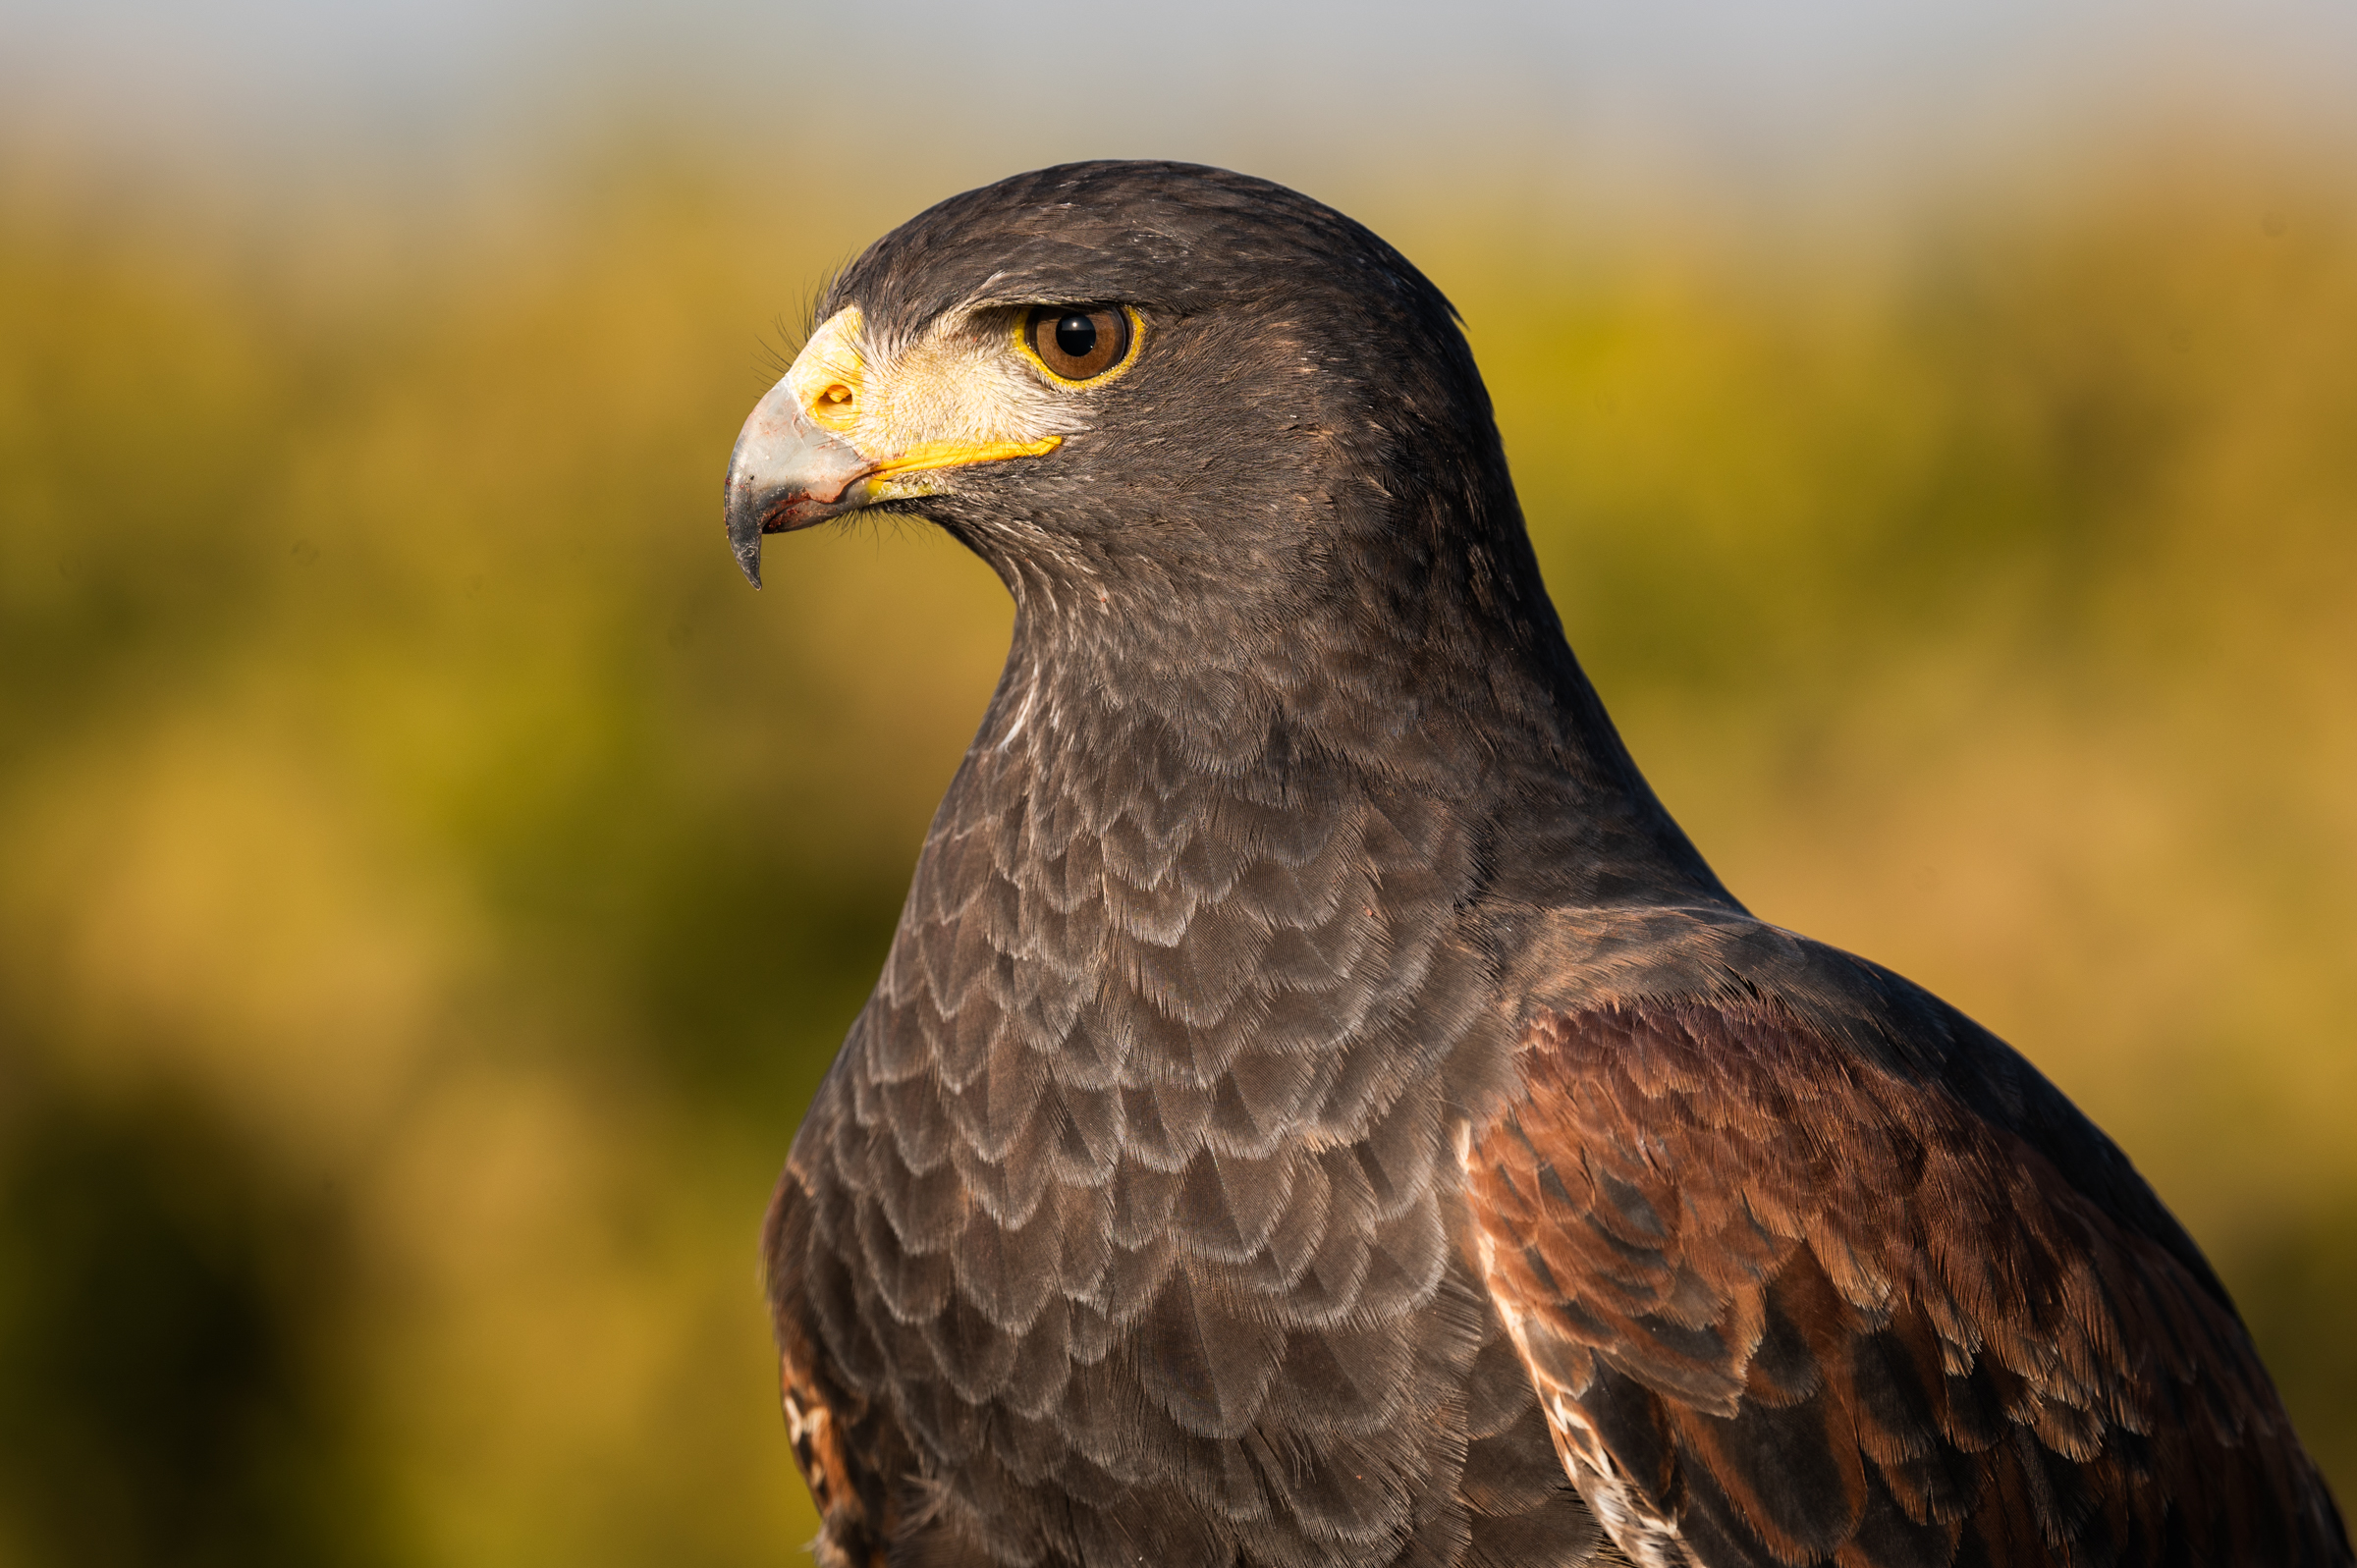 Portrait of Ezra, a Harris's hawk used for crop protection